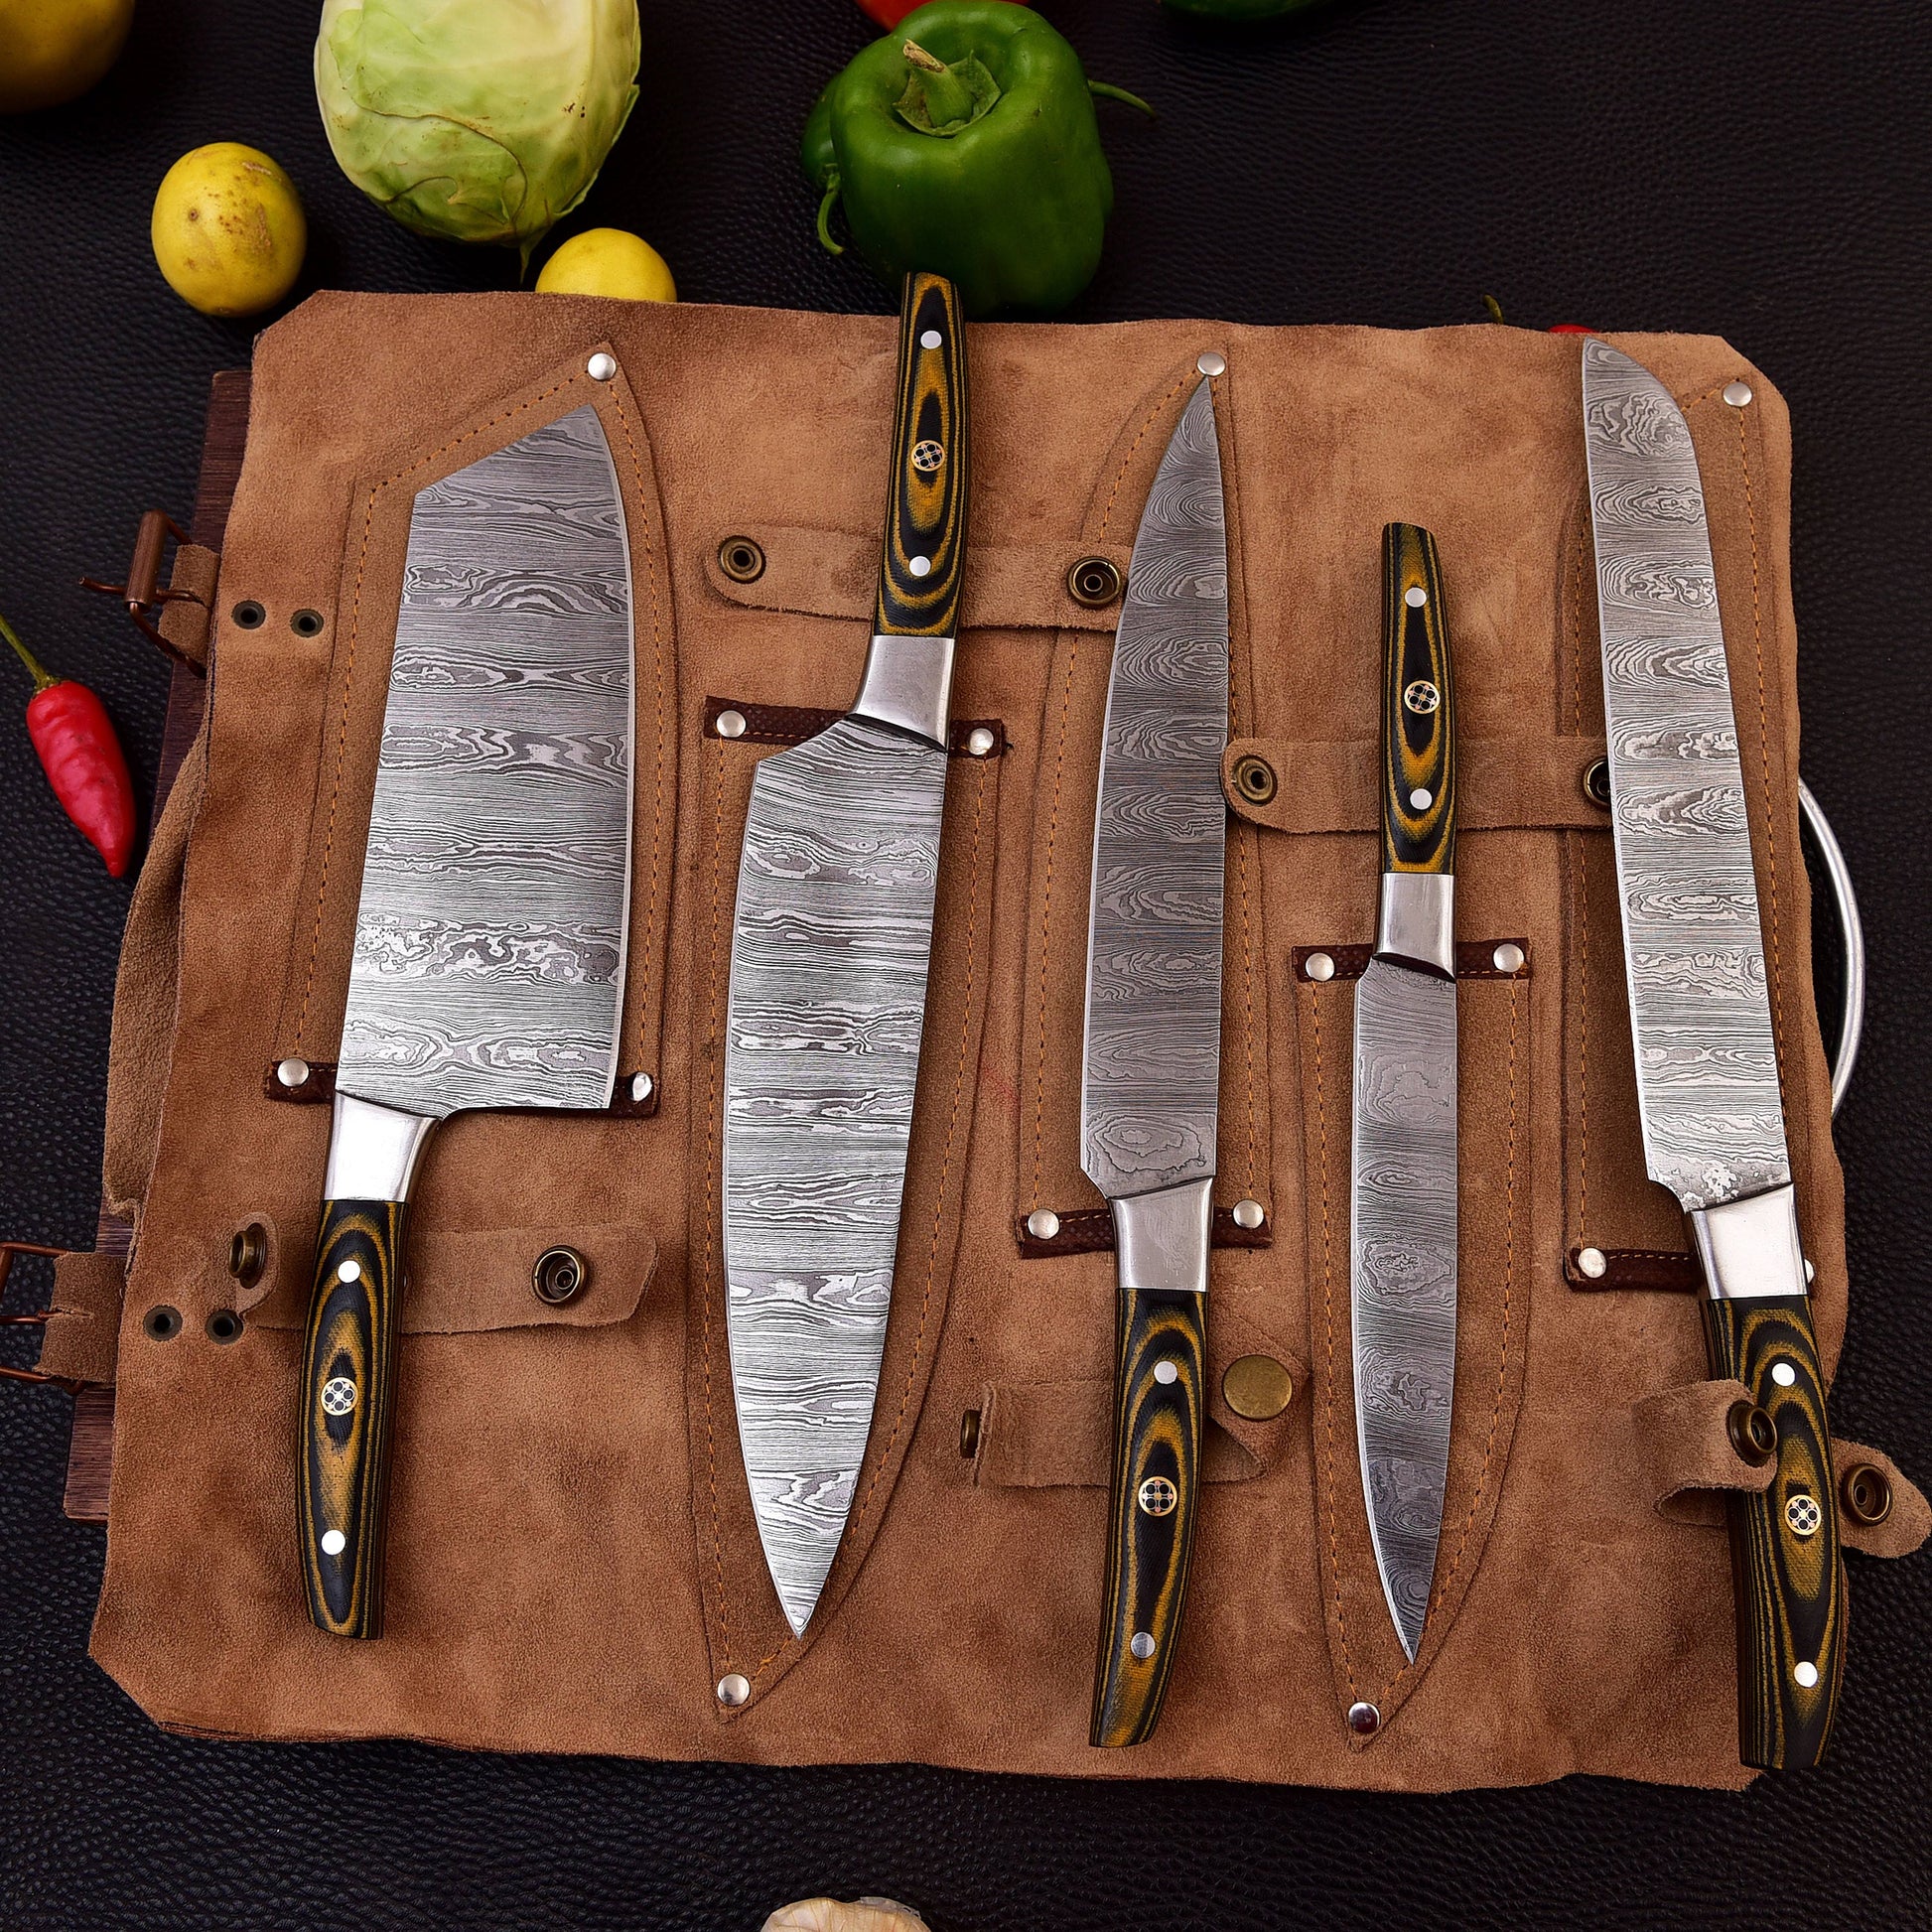 5pc Custom Damascus Steel Cooking Knives, Handmade BBQ Indoor, Outdoor Camping Kitchen Chef Knife Set, Full Tang Knives Gift For Dad